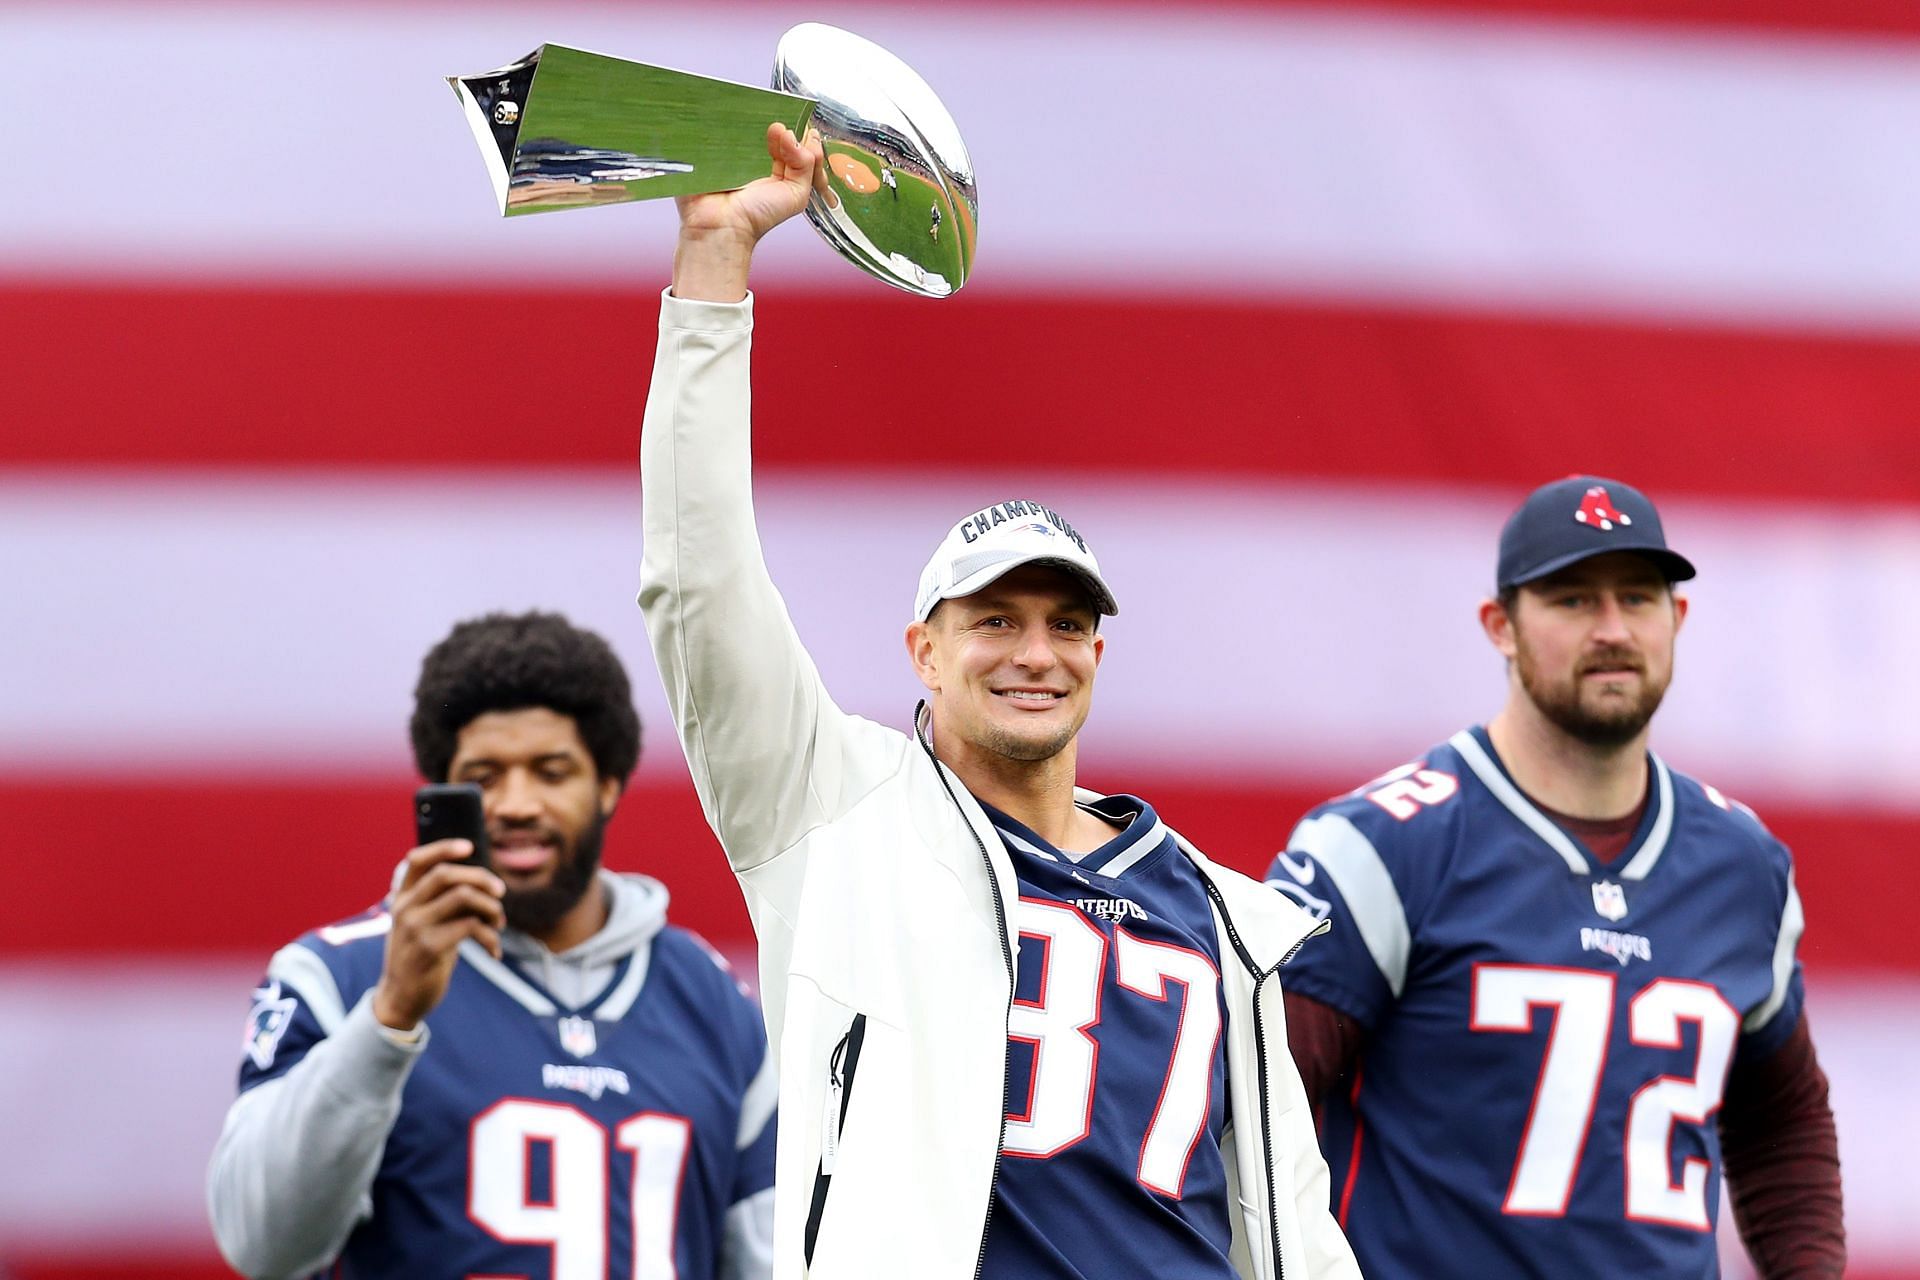 Rob Gronkowski lifts the Vince Lombardi Trophy